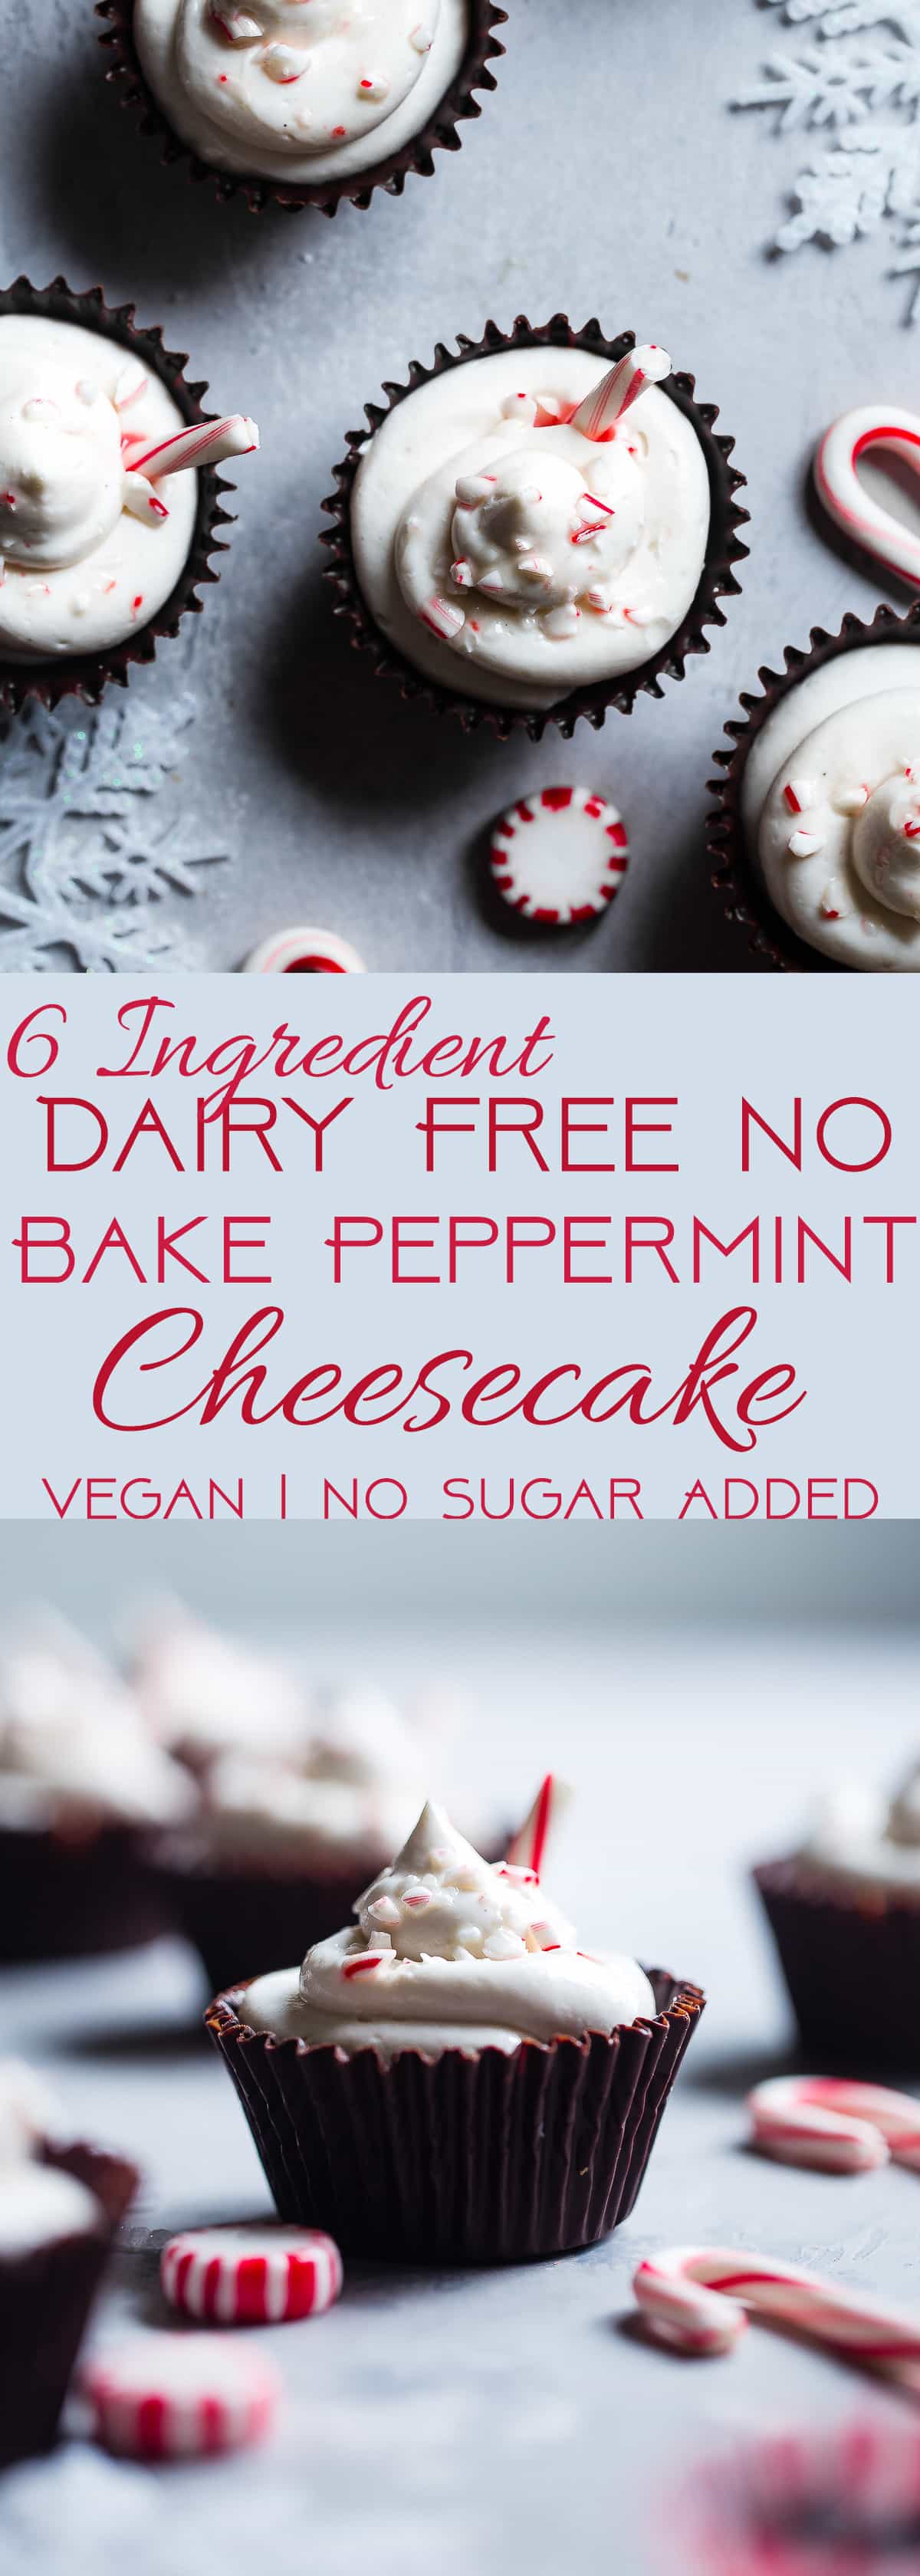 Dairy Free No Bake Peppermint Cheesecake Cups - A vegan-friendly, gluten, grain and dairy free dessert with no sugar added, that is only 6 ingredients! A healthy holiday treat for under 250 calories! | Foodfaithfitness.com | @FoodFaithFit | peppermint bark cheesecake. vegan cheesecake. peppermint cheesecake bites. chocolate cheesecake. vegan peppermint cheesecake. gluten free cheesecake.